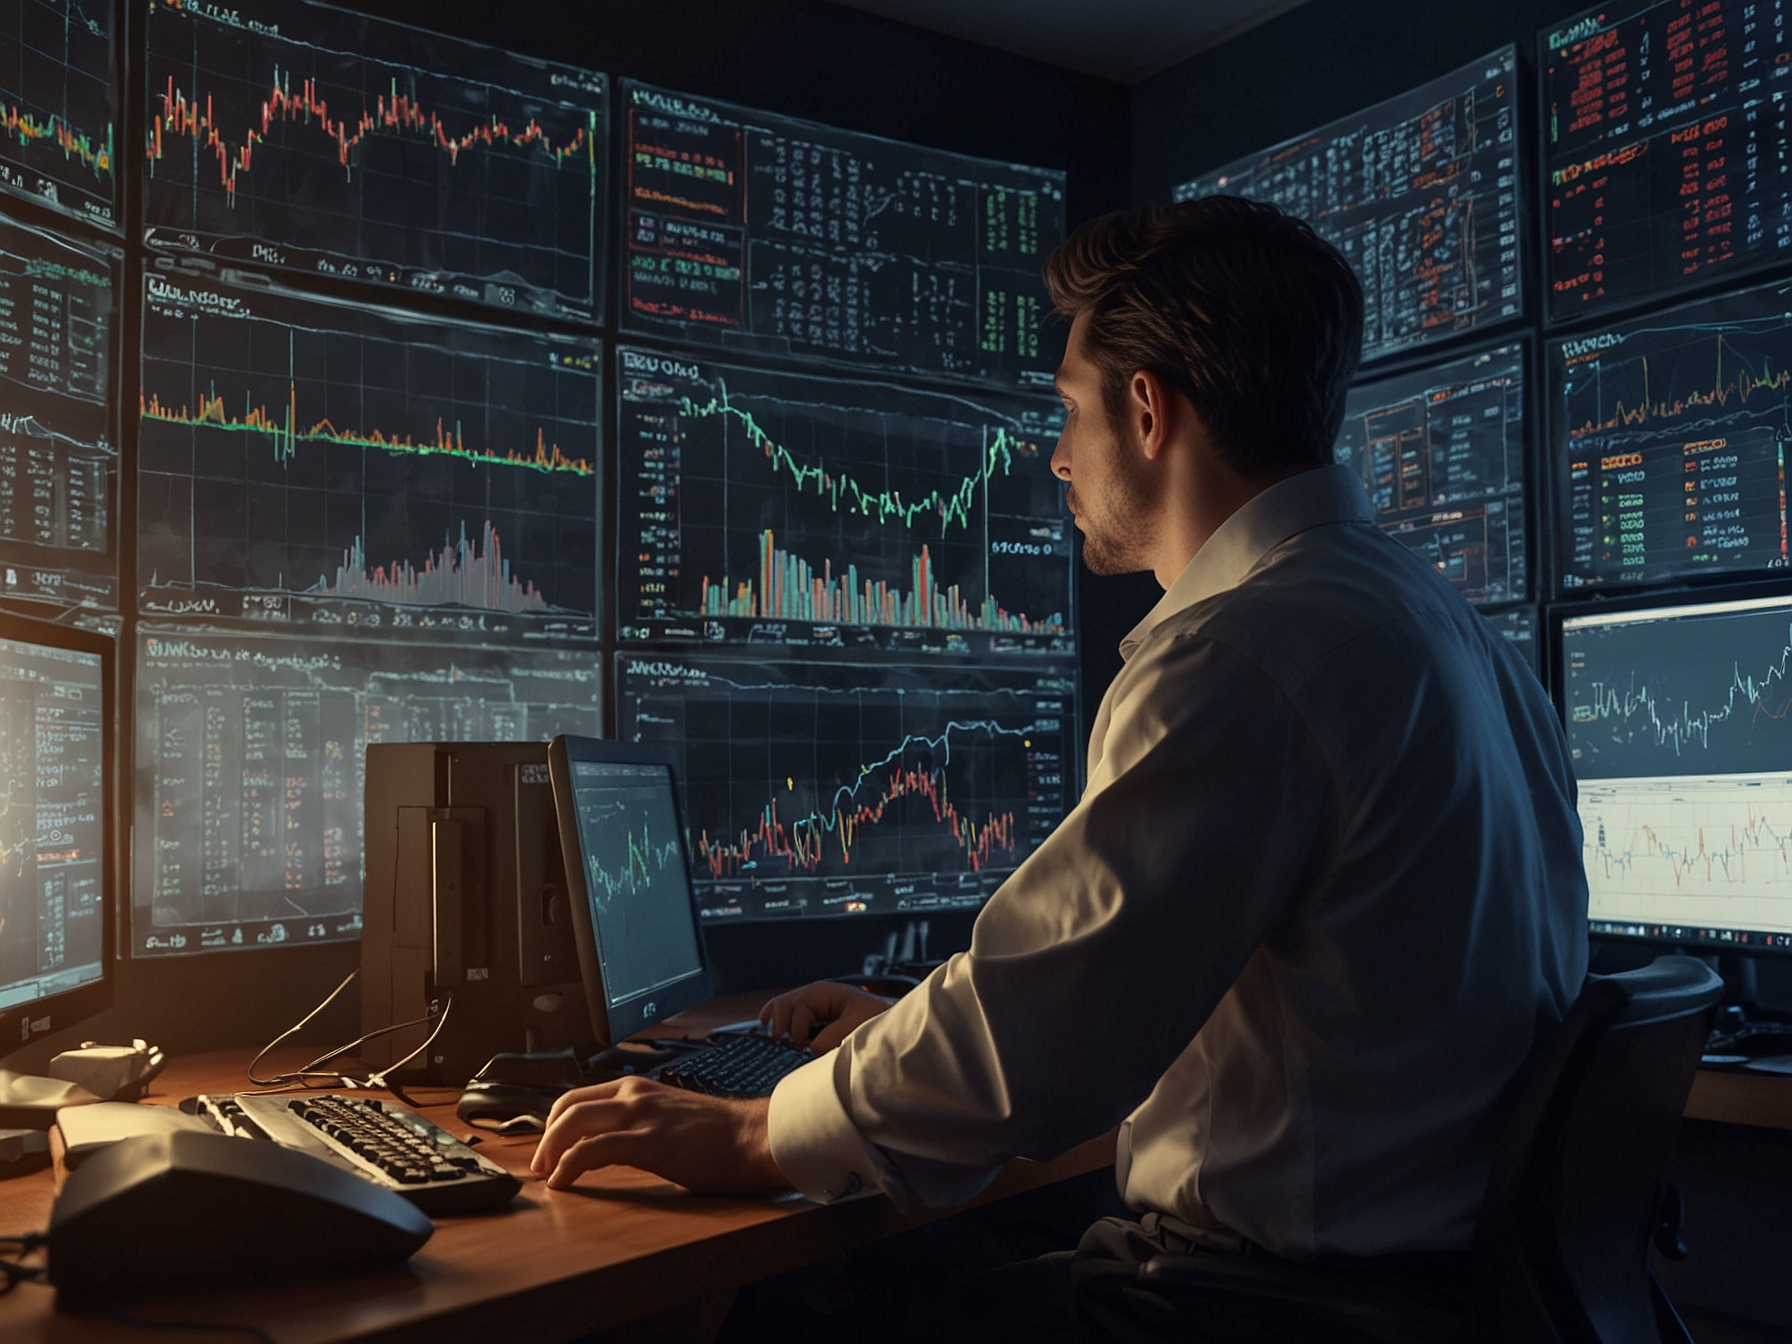 A trader closely monitoring a computer screen displaying large order flows and trading activities, symbolizing 'whales' making significant trades that influence the stock market.